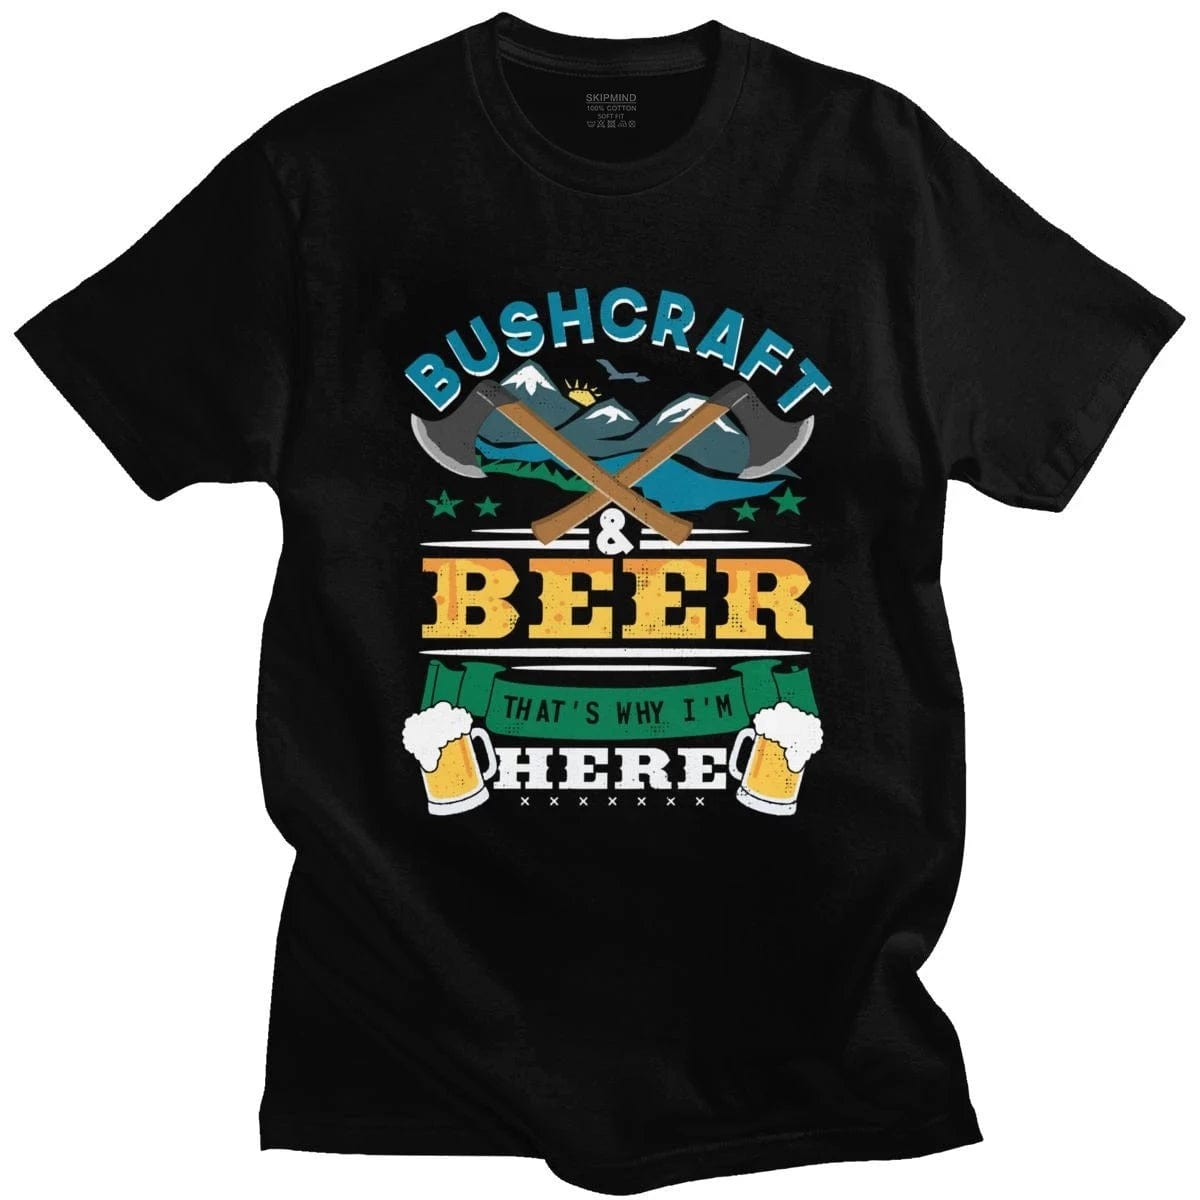 T-Shirt "Bushcraft & Beer That Is Why I Am Here" Schwarz / XS prepper-store.com